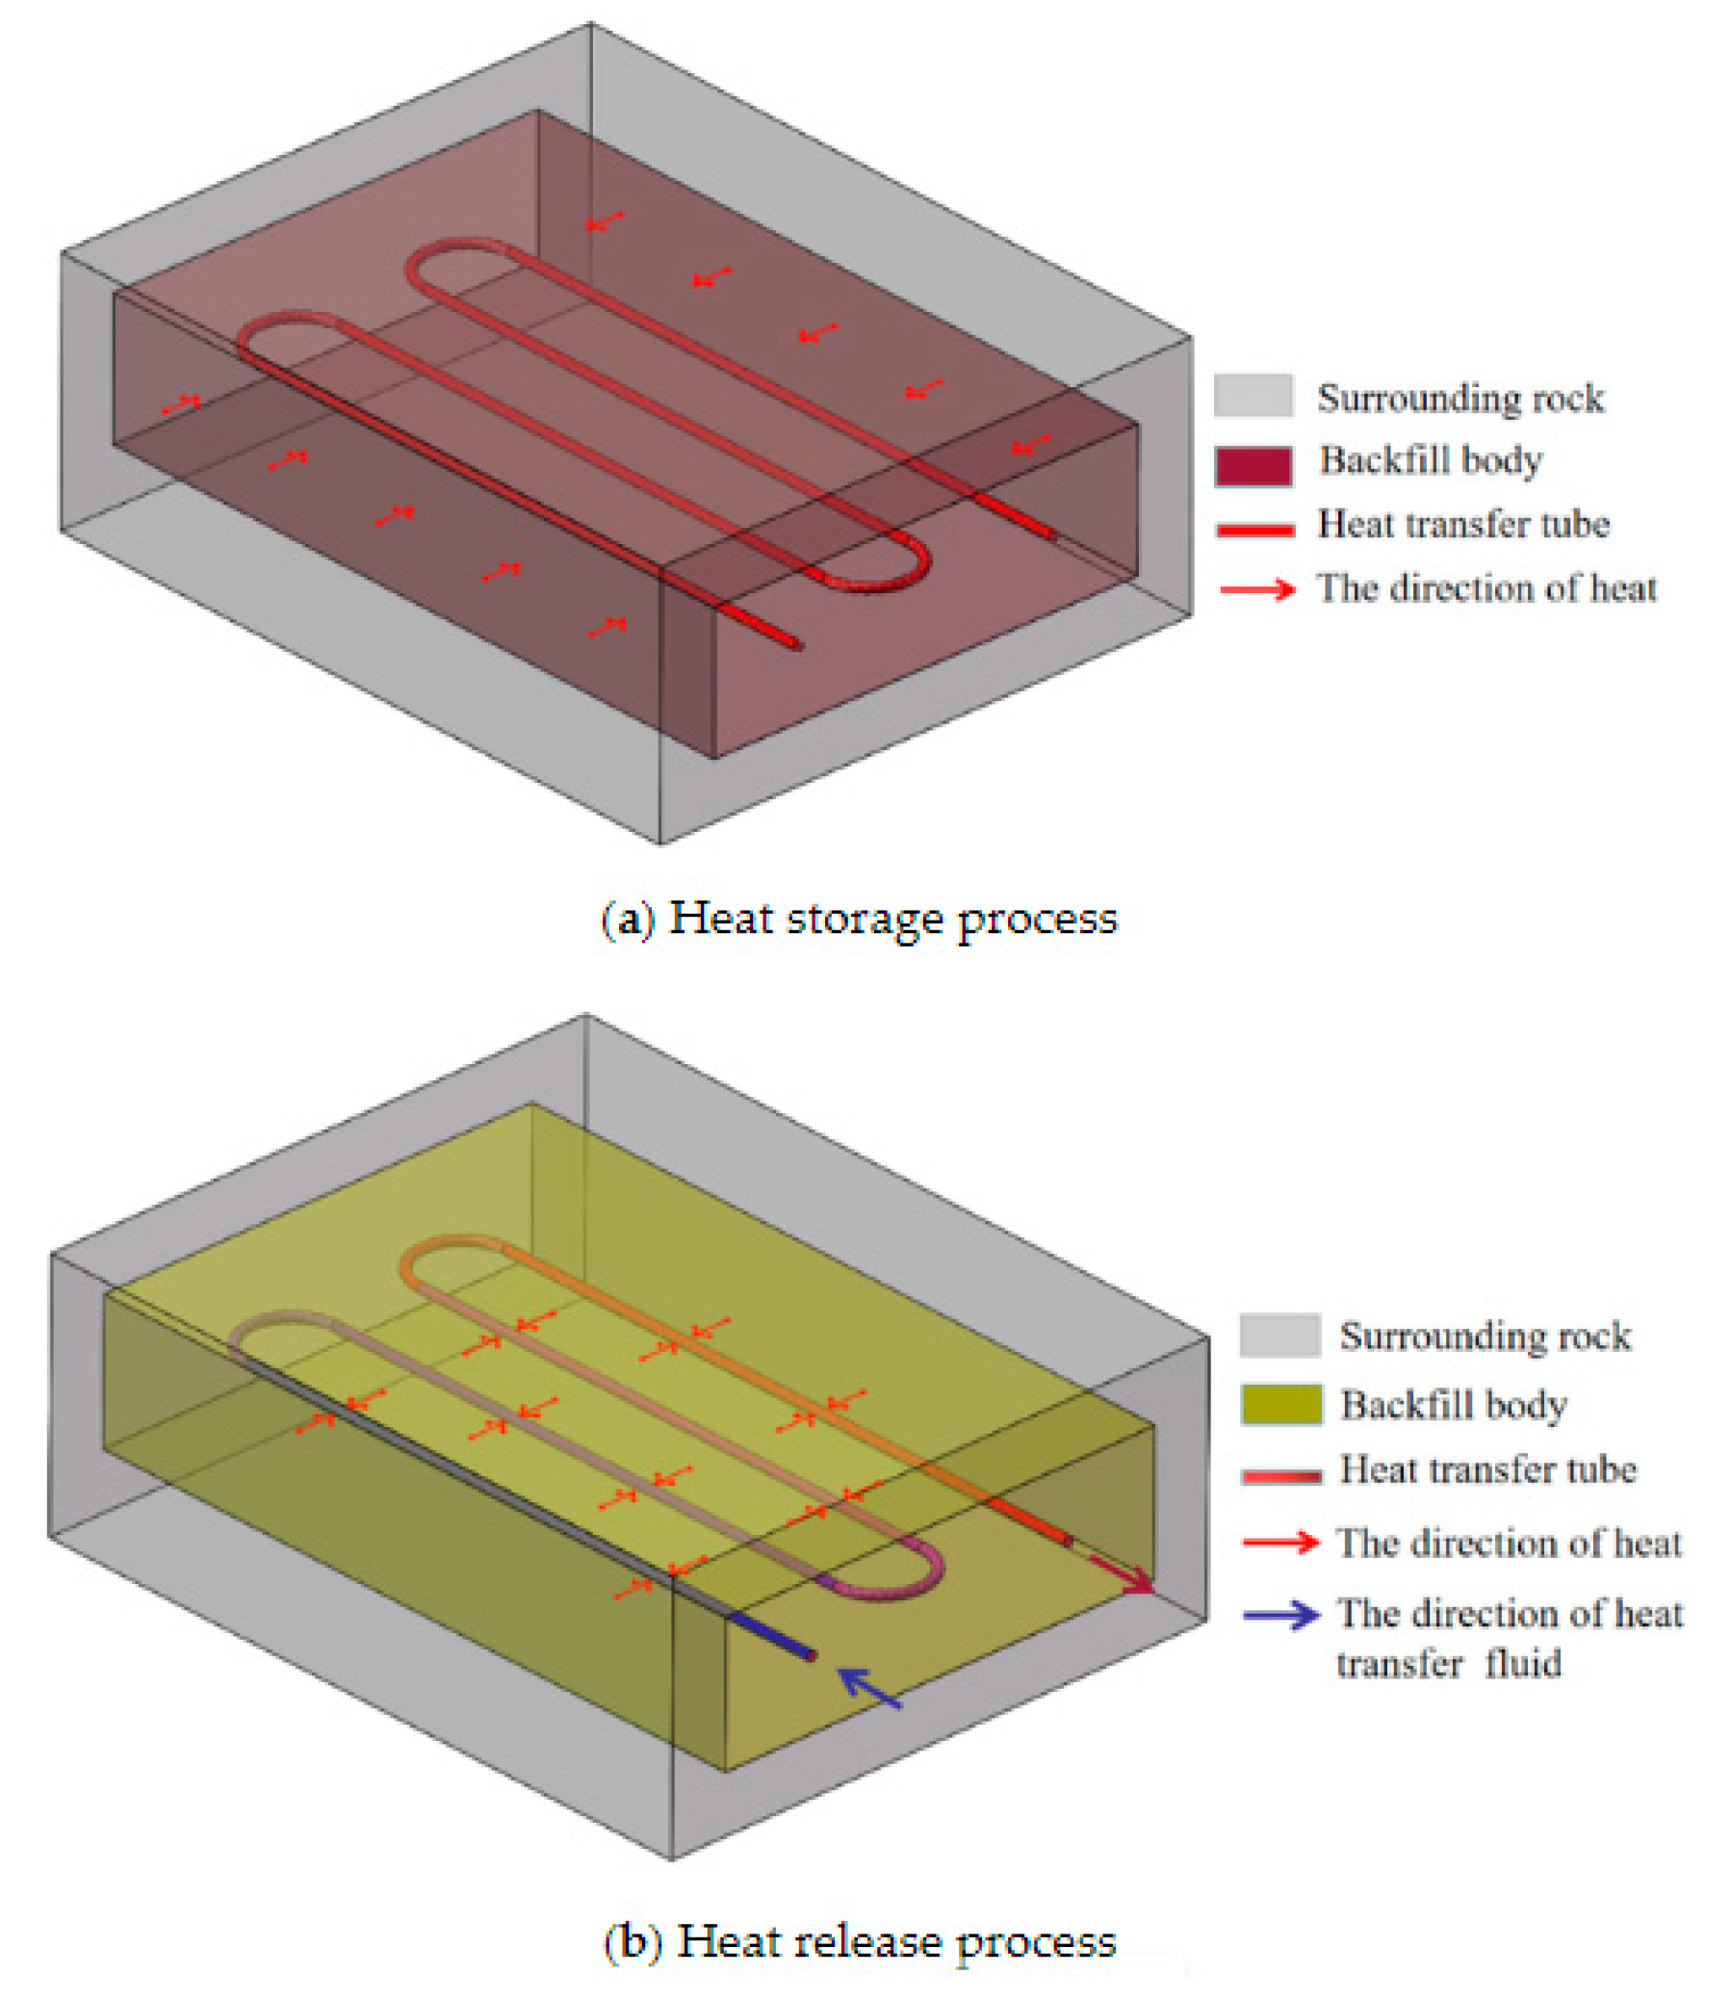 The working process of the phase-change heat storage backfill body.